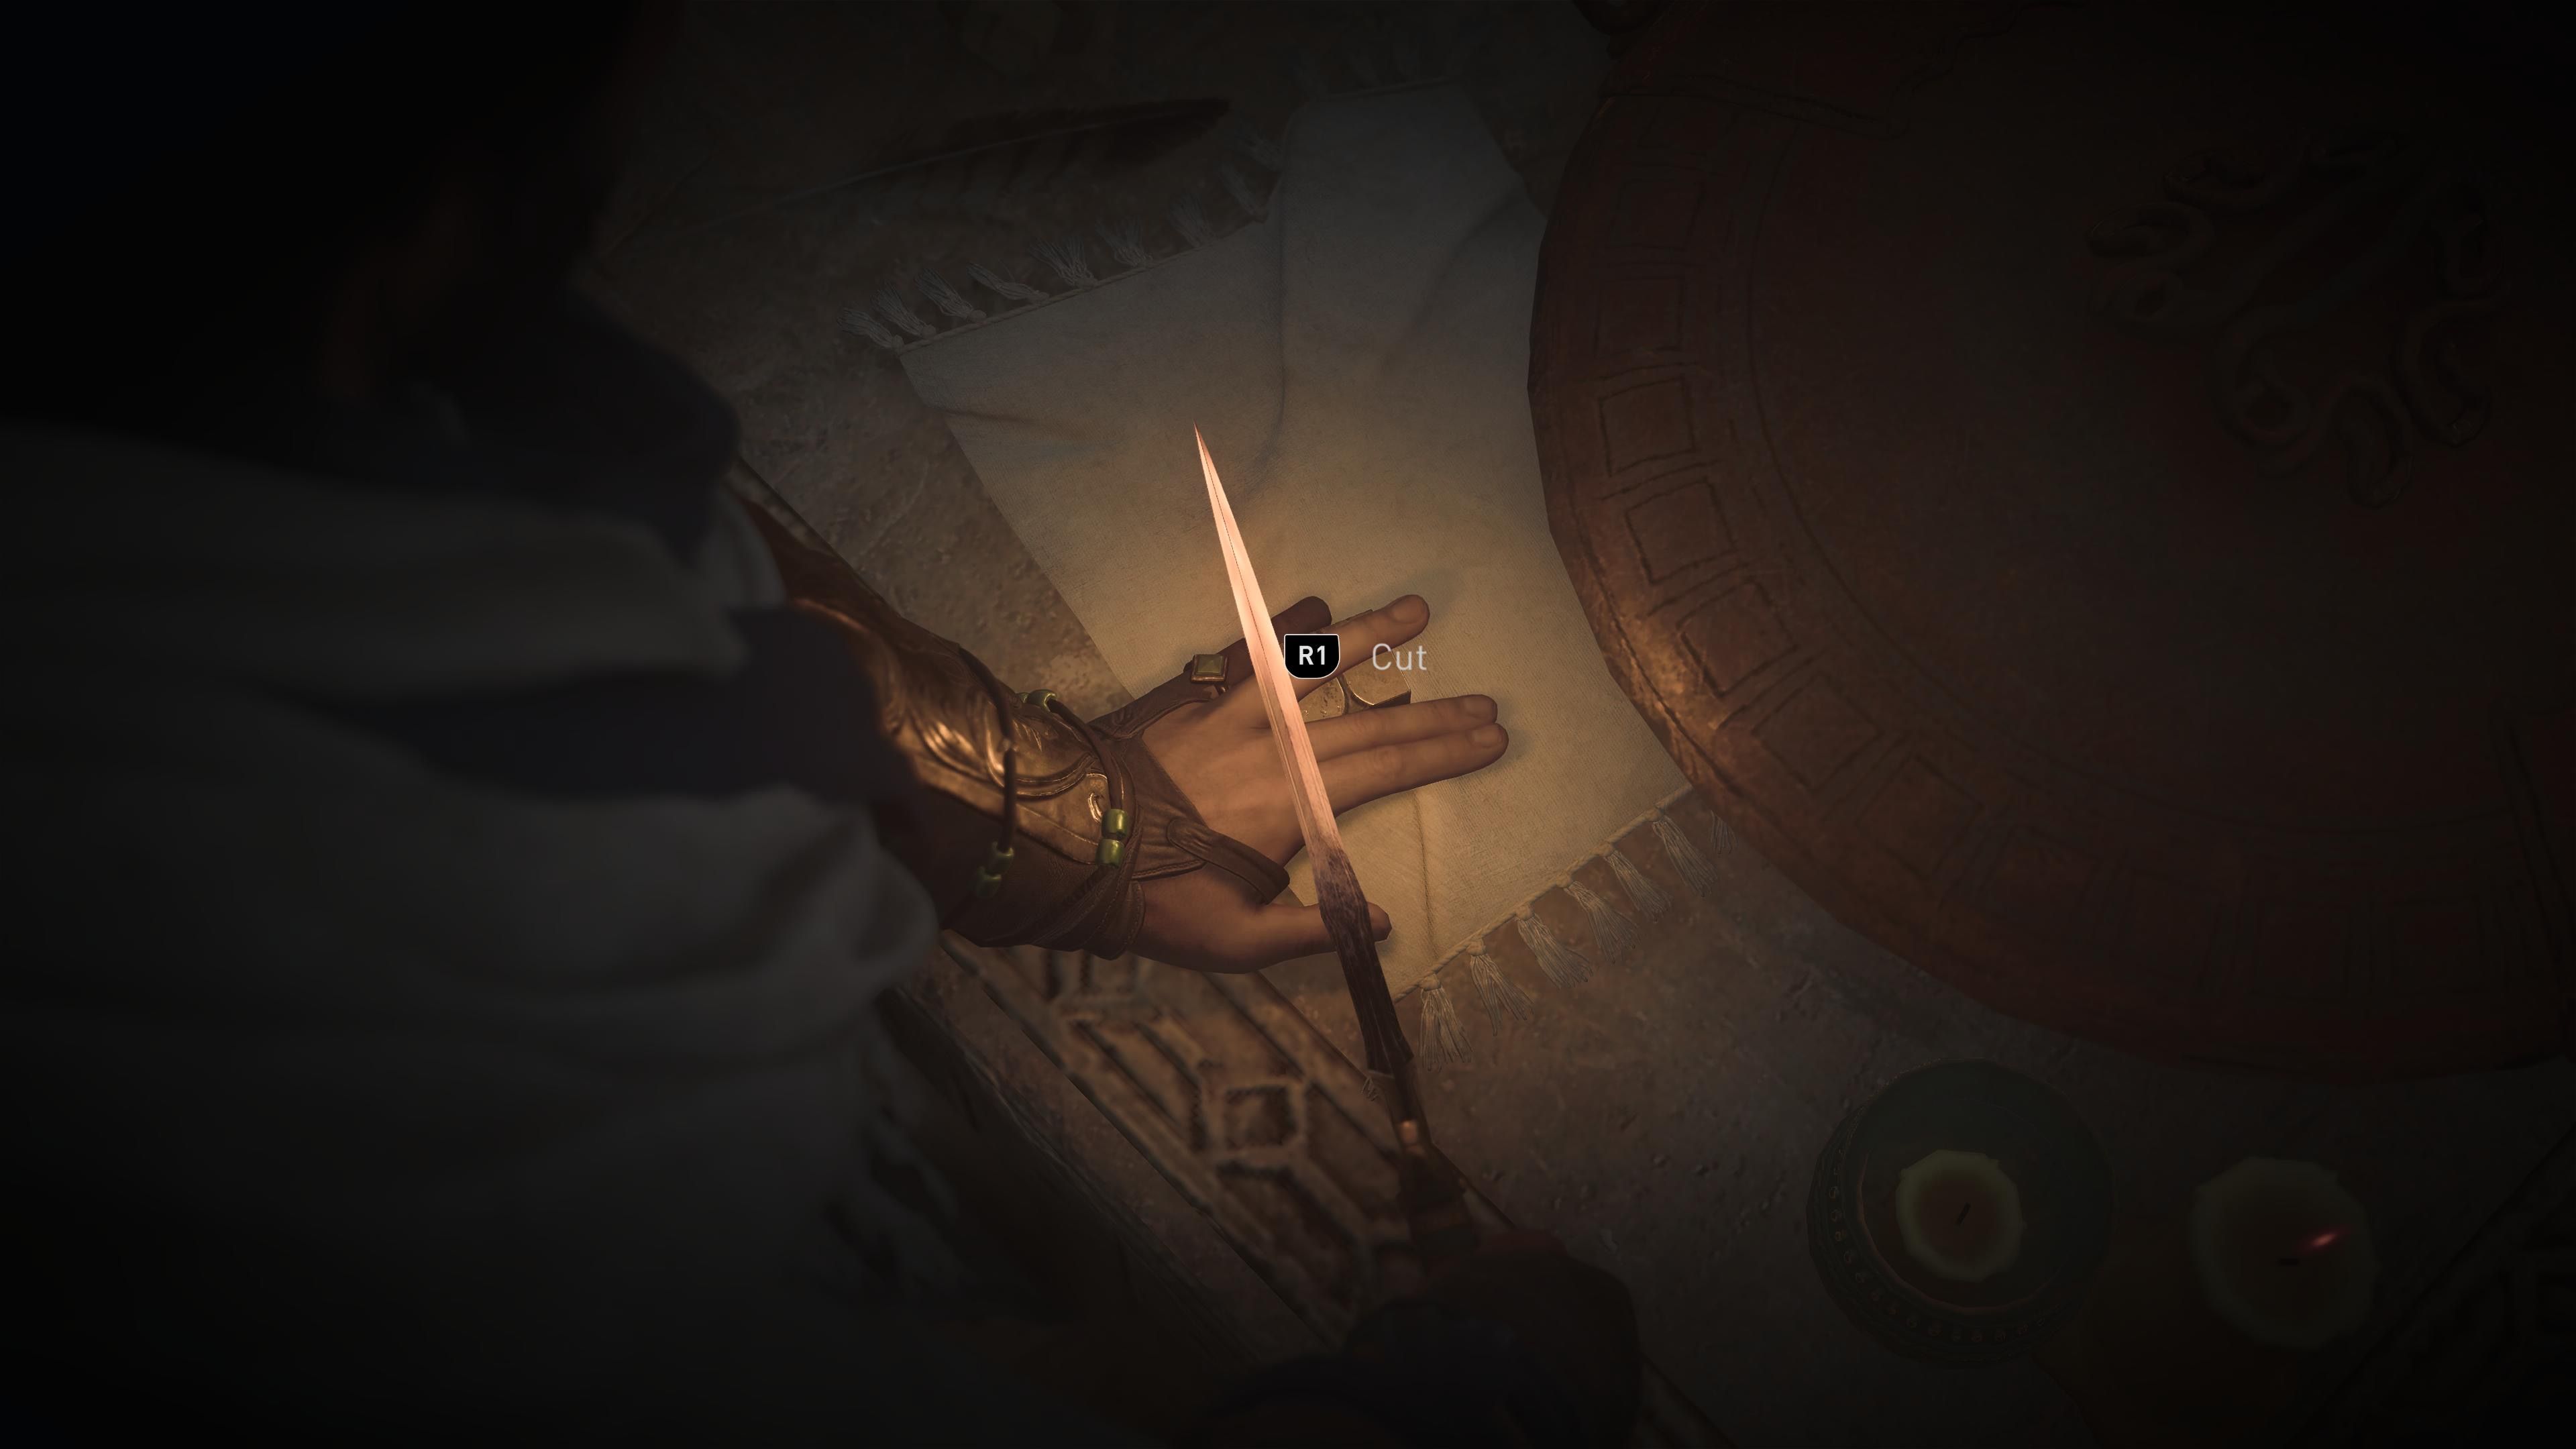 A hand is illuminated in a dark scene, with the ring finger resting on an object above the others. Held above the ring finger is a knife, accompanied by an R1 button prompt and text that says, 